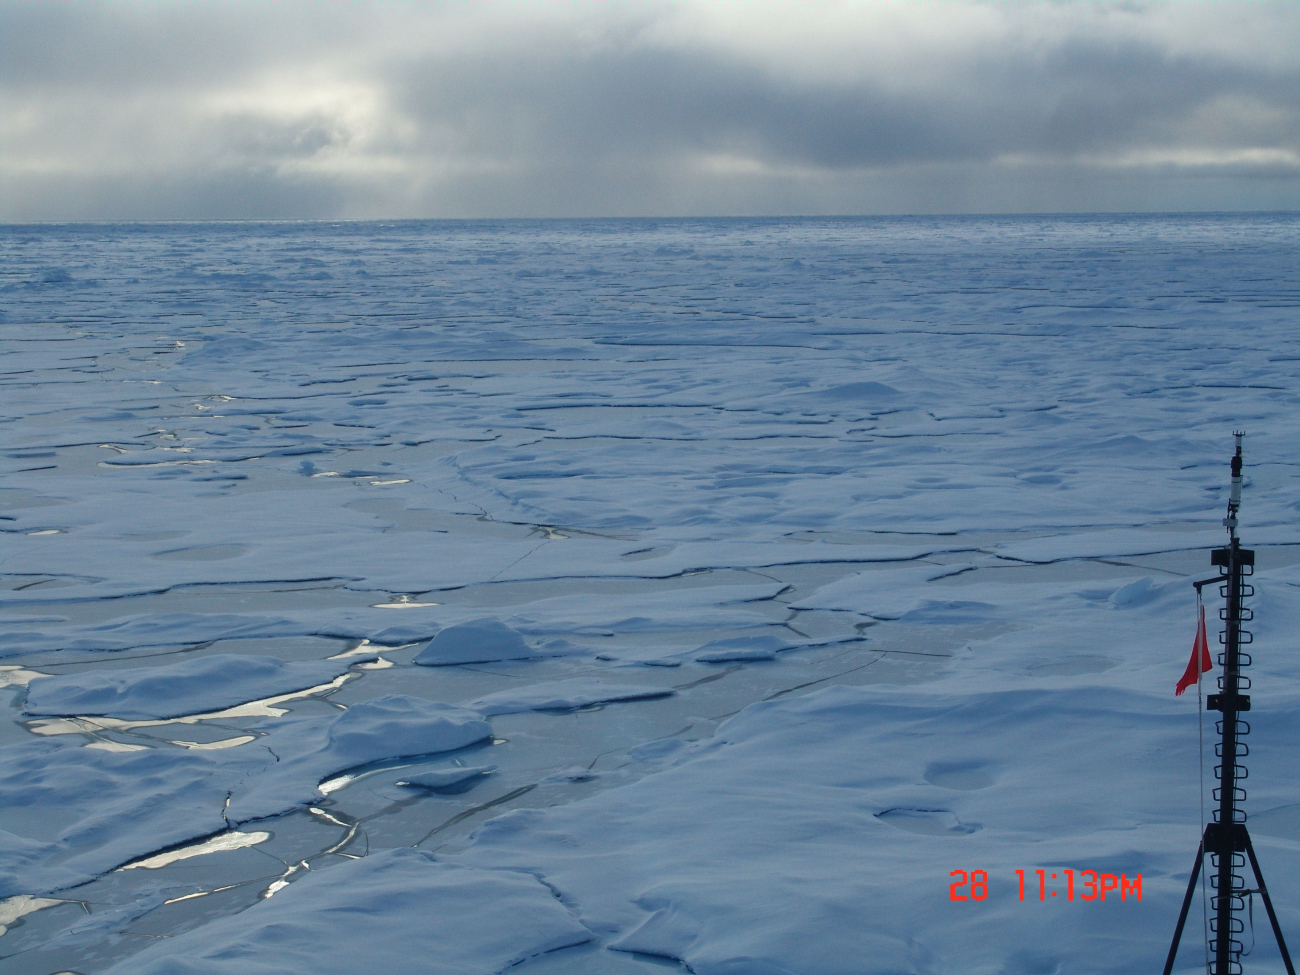 Refreezing melt ponds in multi-year ice